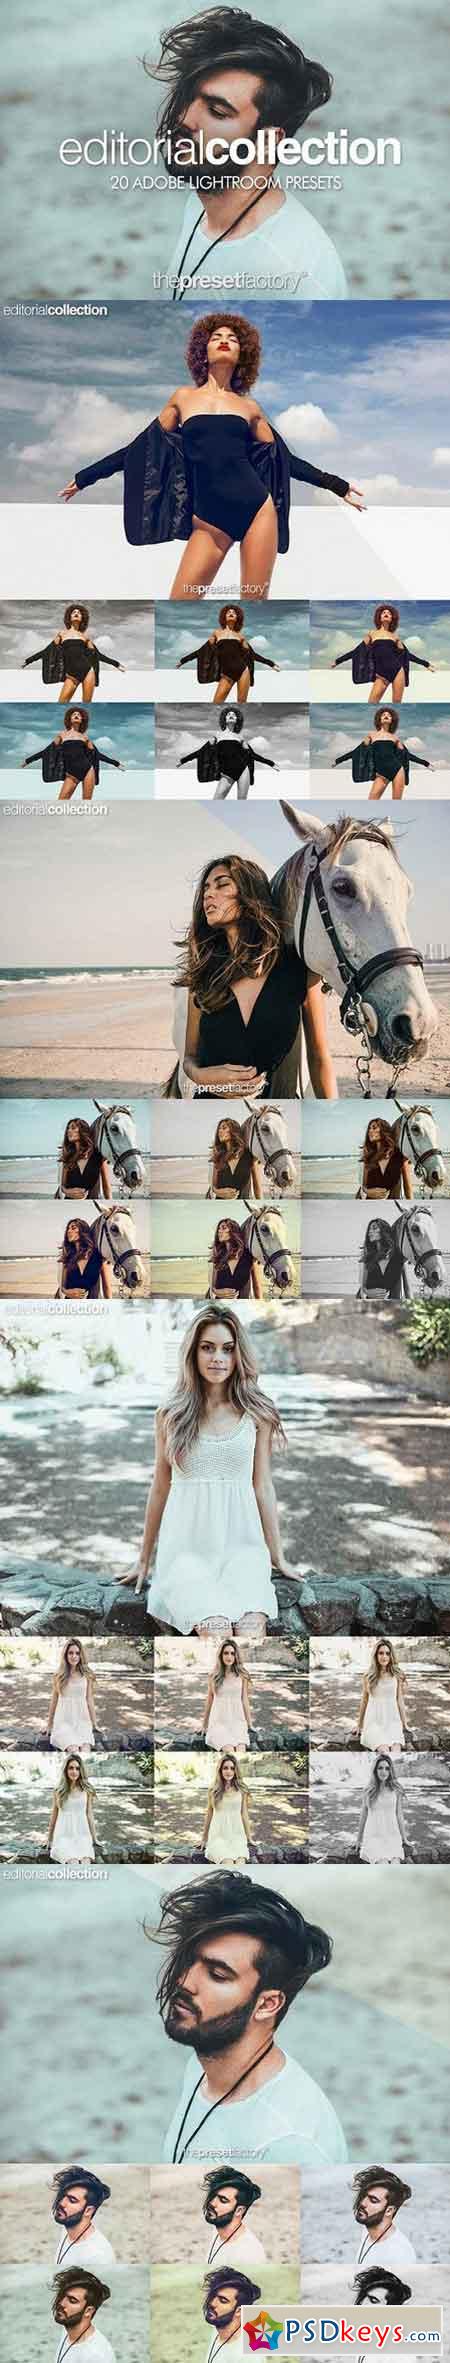 Editorial Collection for Lightroom 1152224